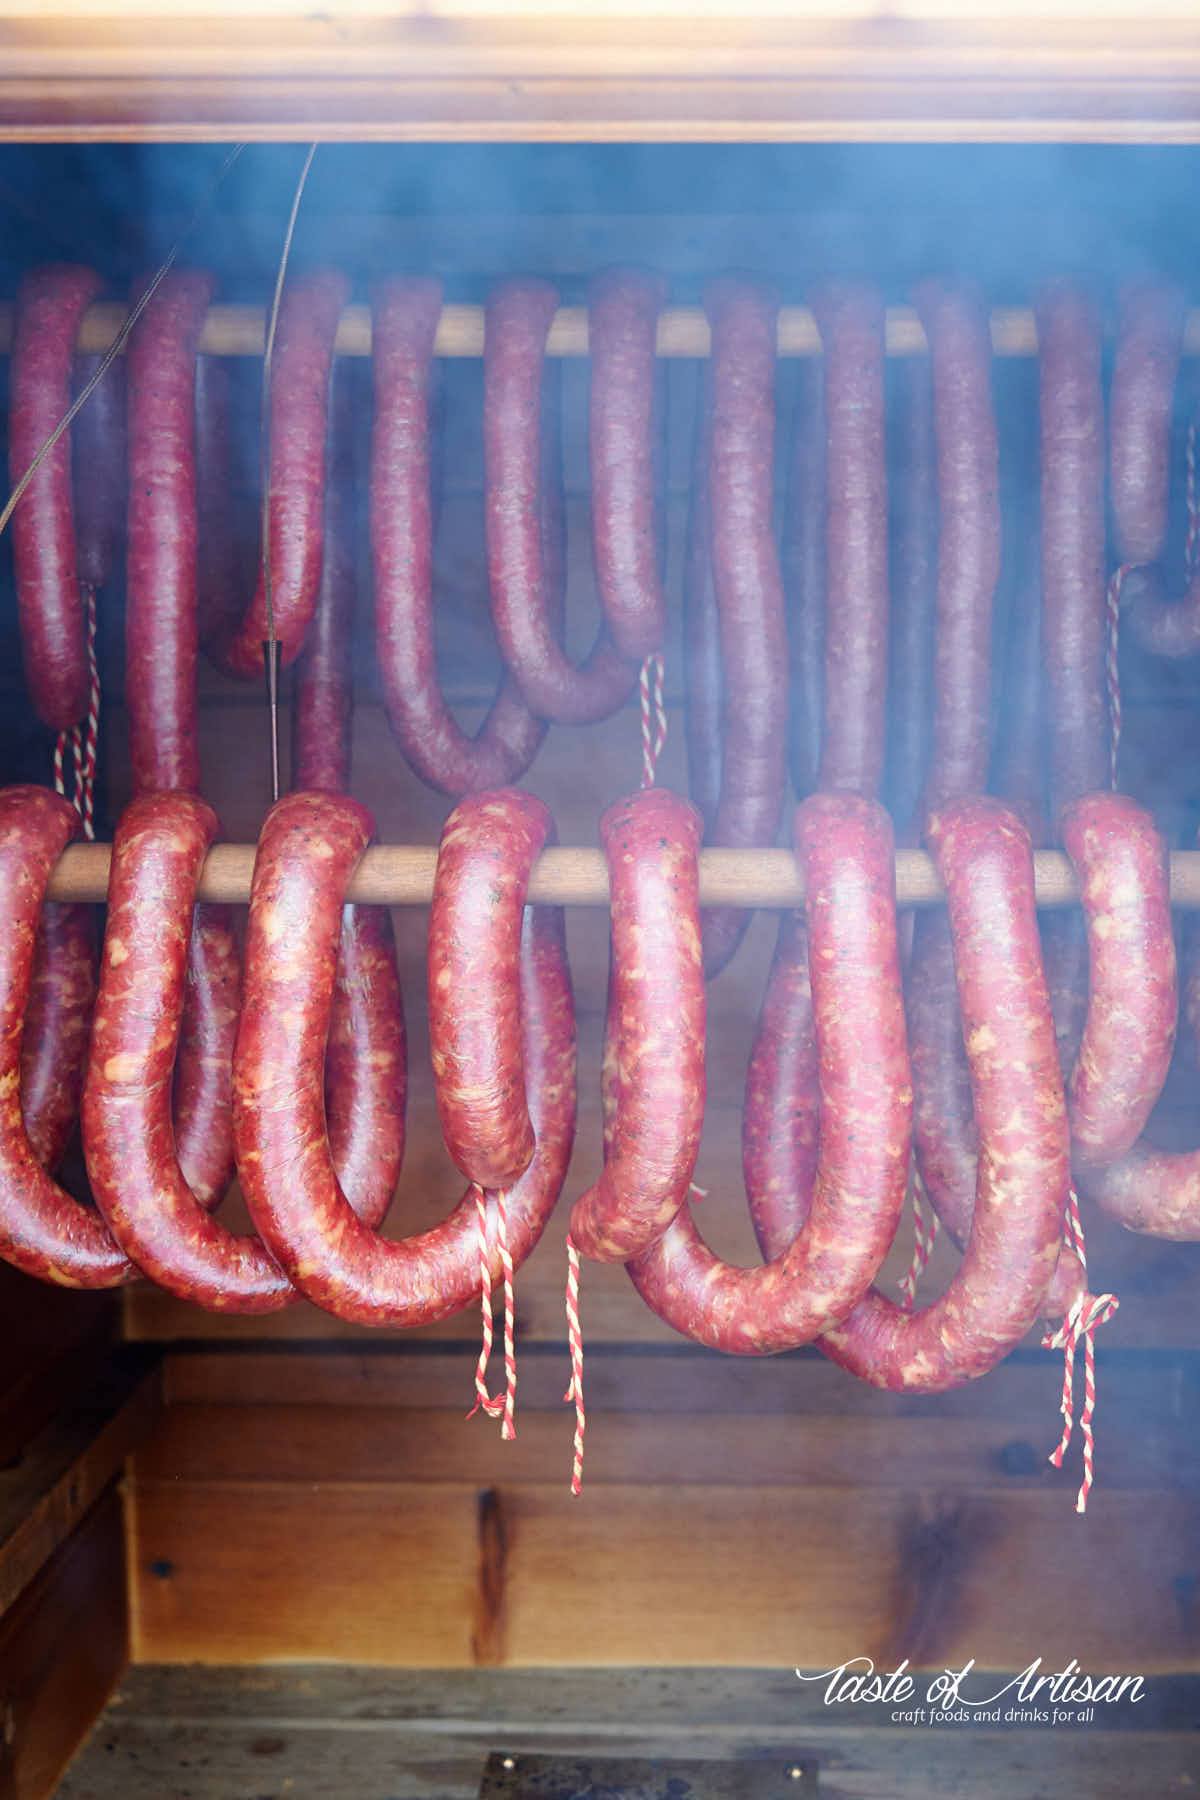 Coils of sausage smoking in a smokehouse, smoke coming out the door.